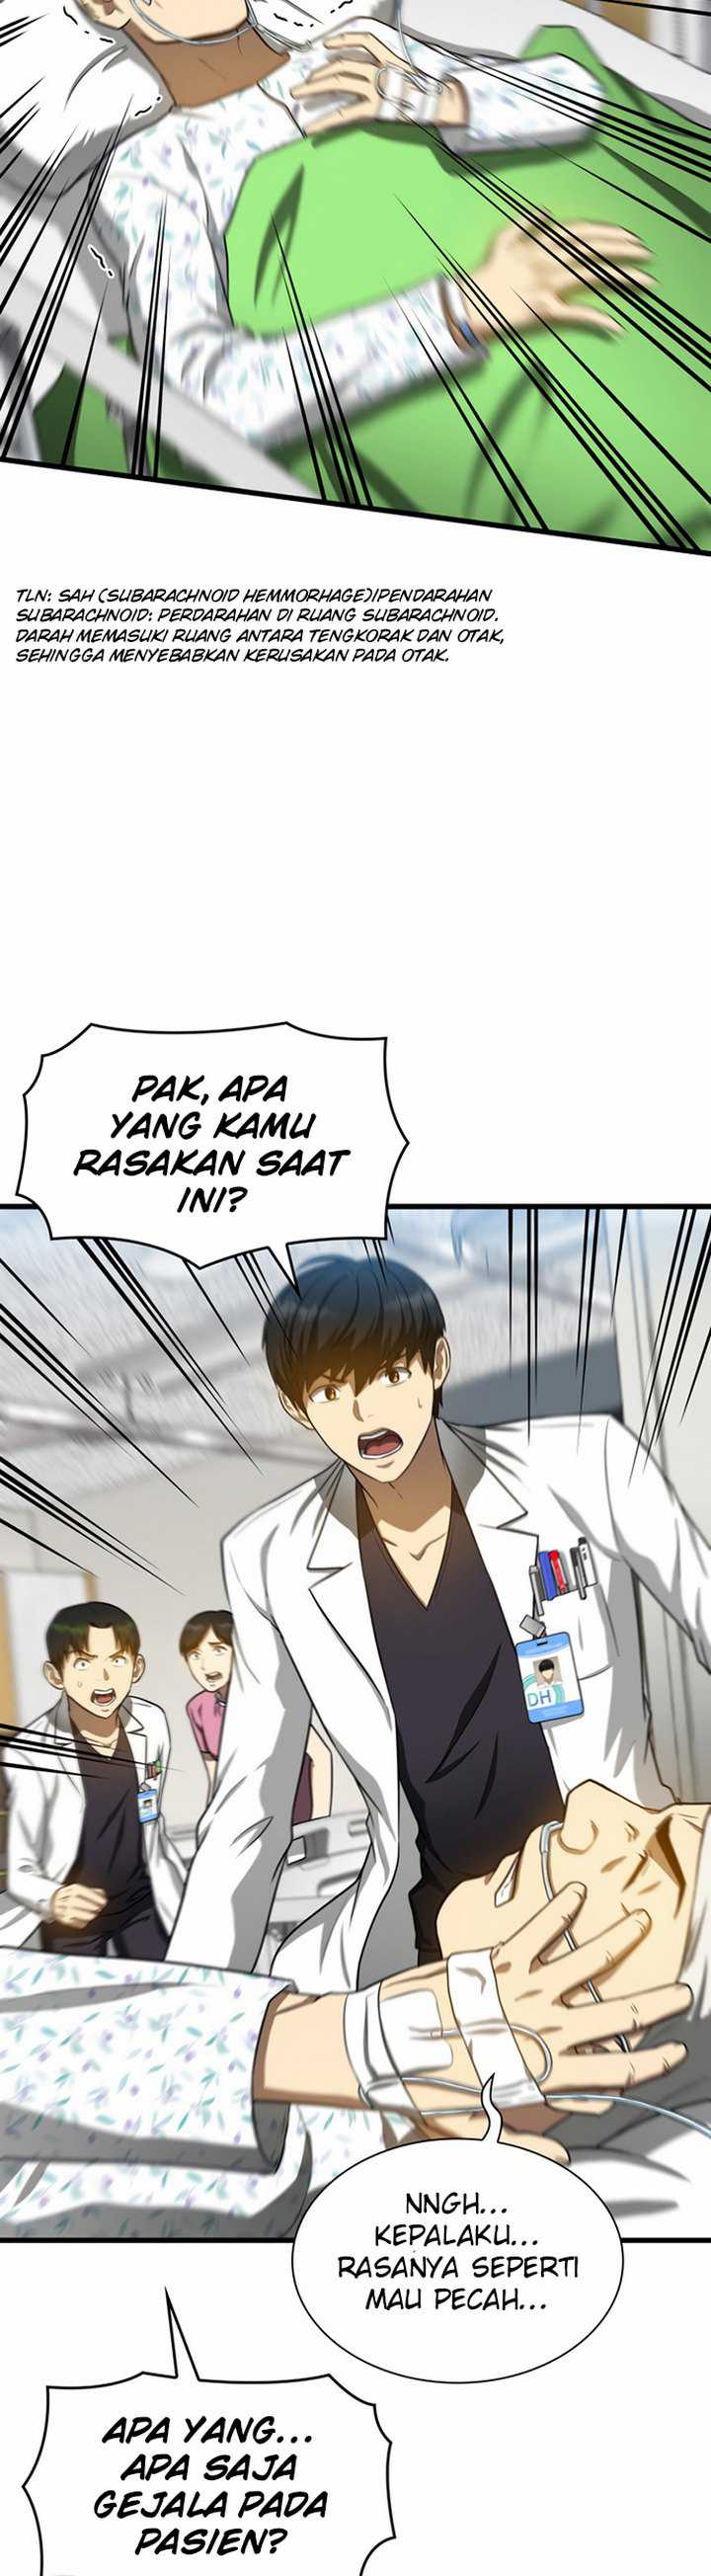 Perfect Surgeon Chapter 16.1